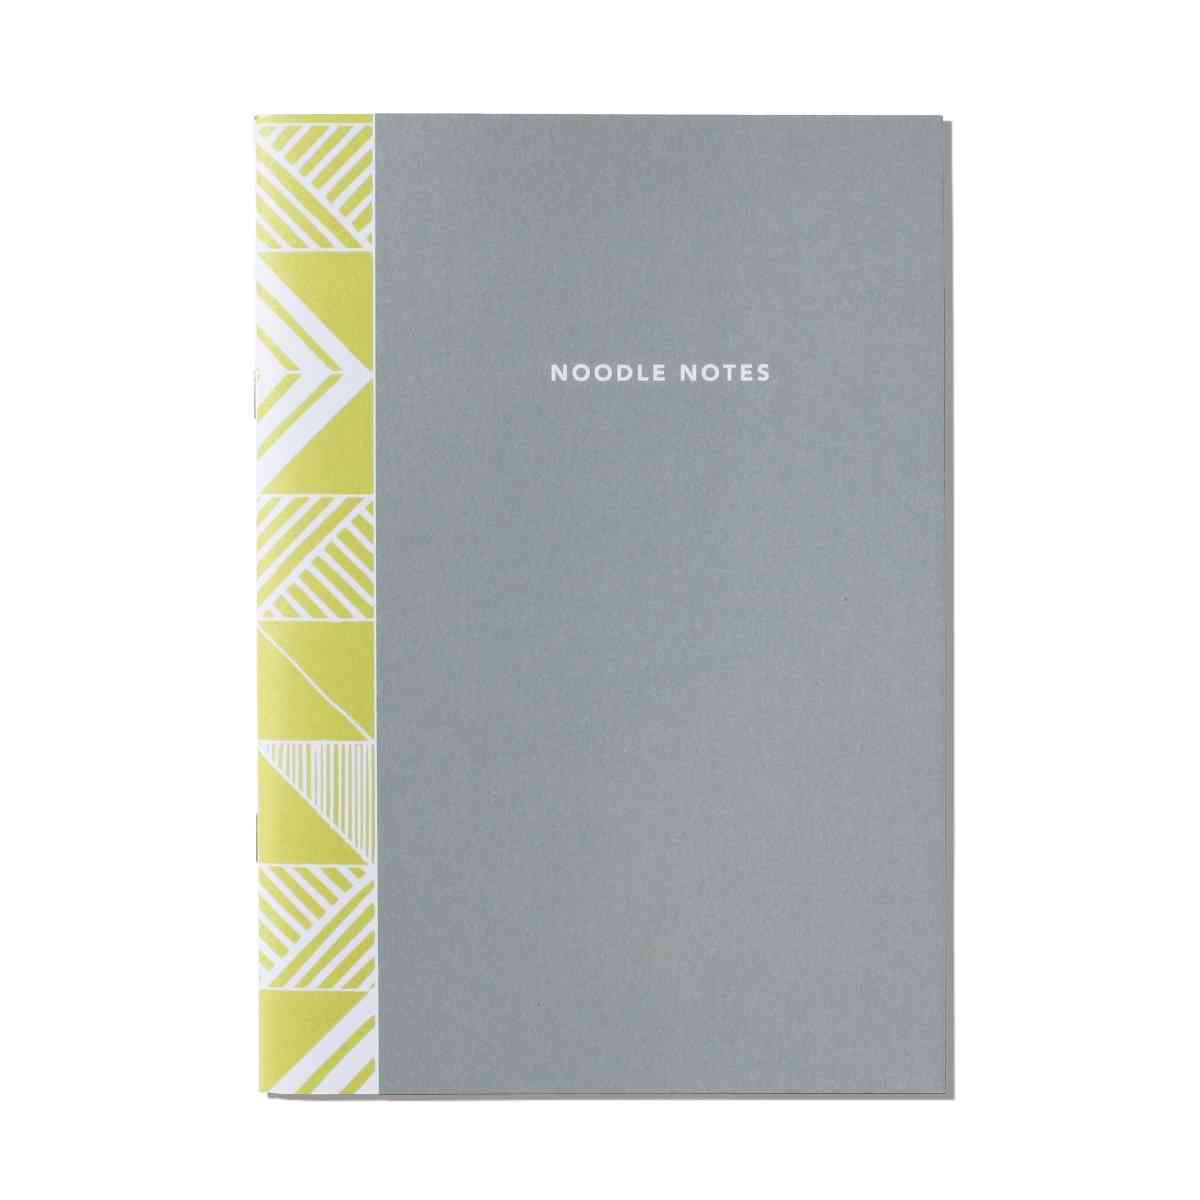 Noodle Notes-notebook With Patterns